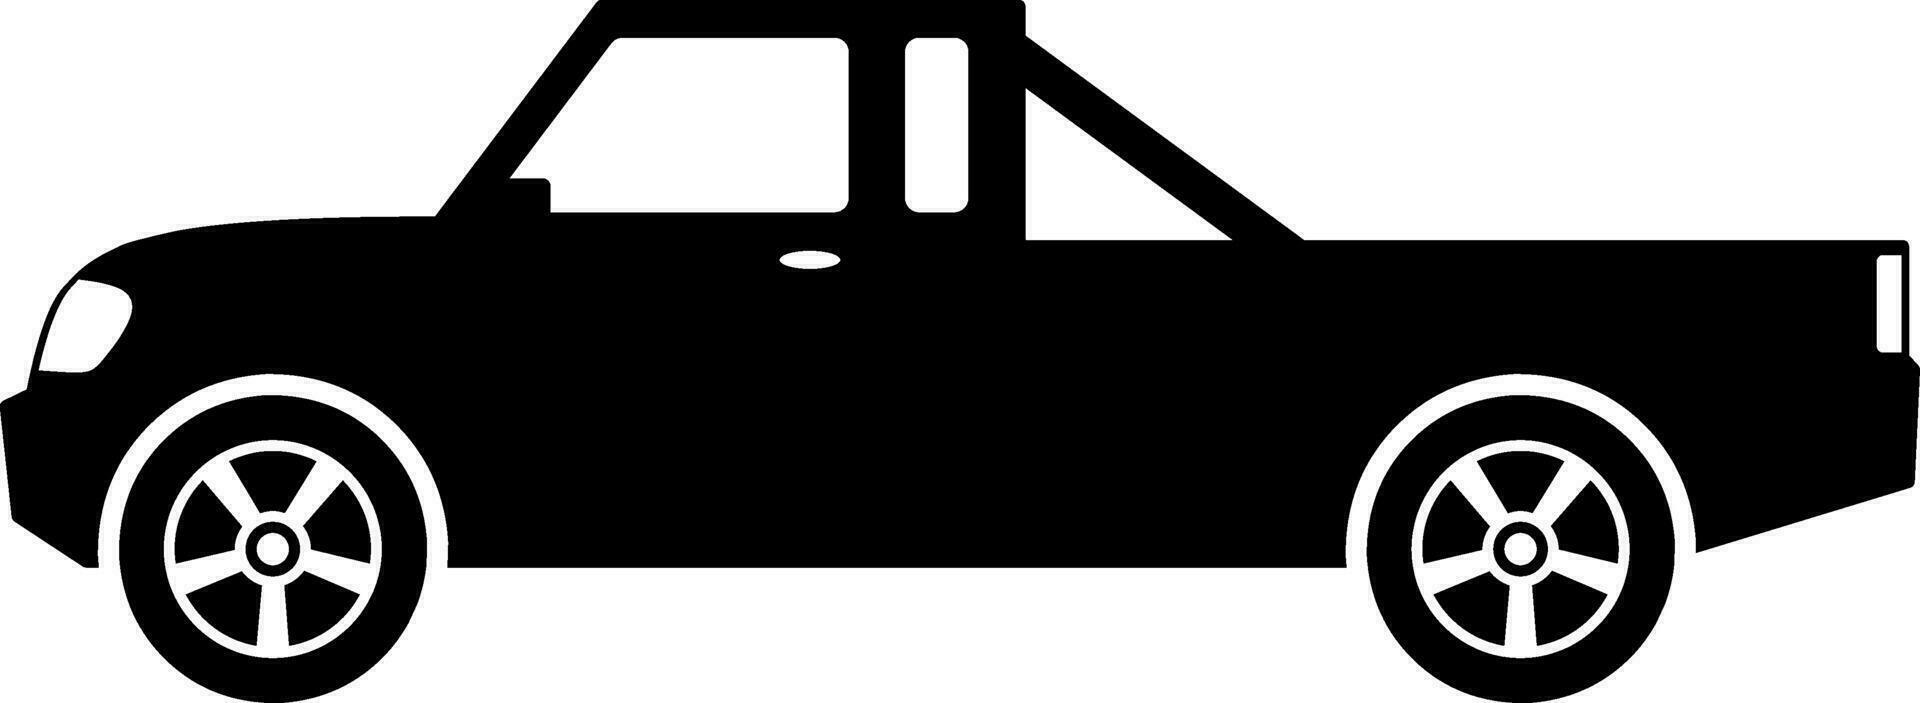 Pickup car icon vector. Countryside delivery car silhouette for icon, symbol and sign. Pickup car for transportation, shipment, delivery, package or transit vector